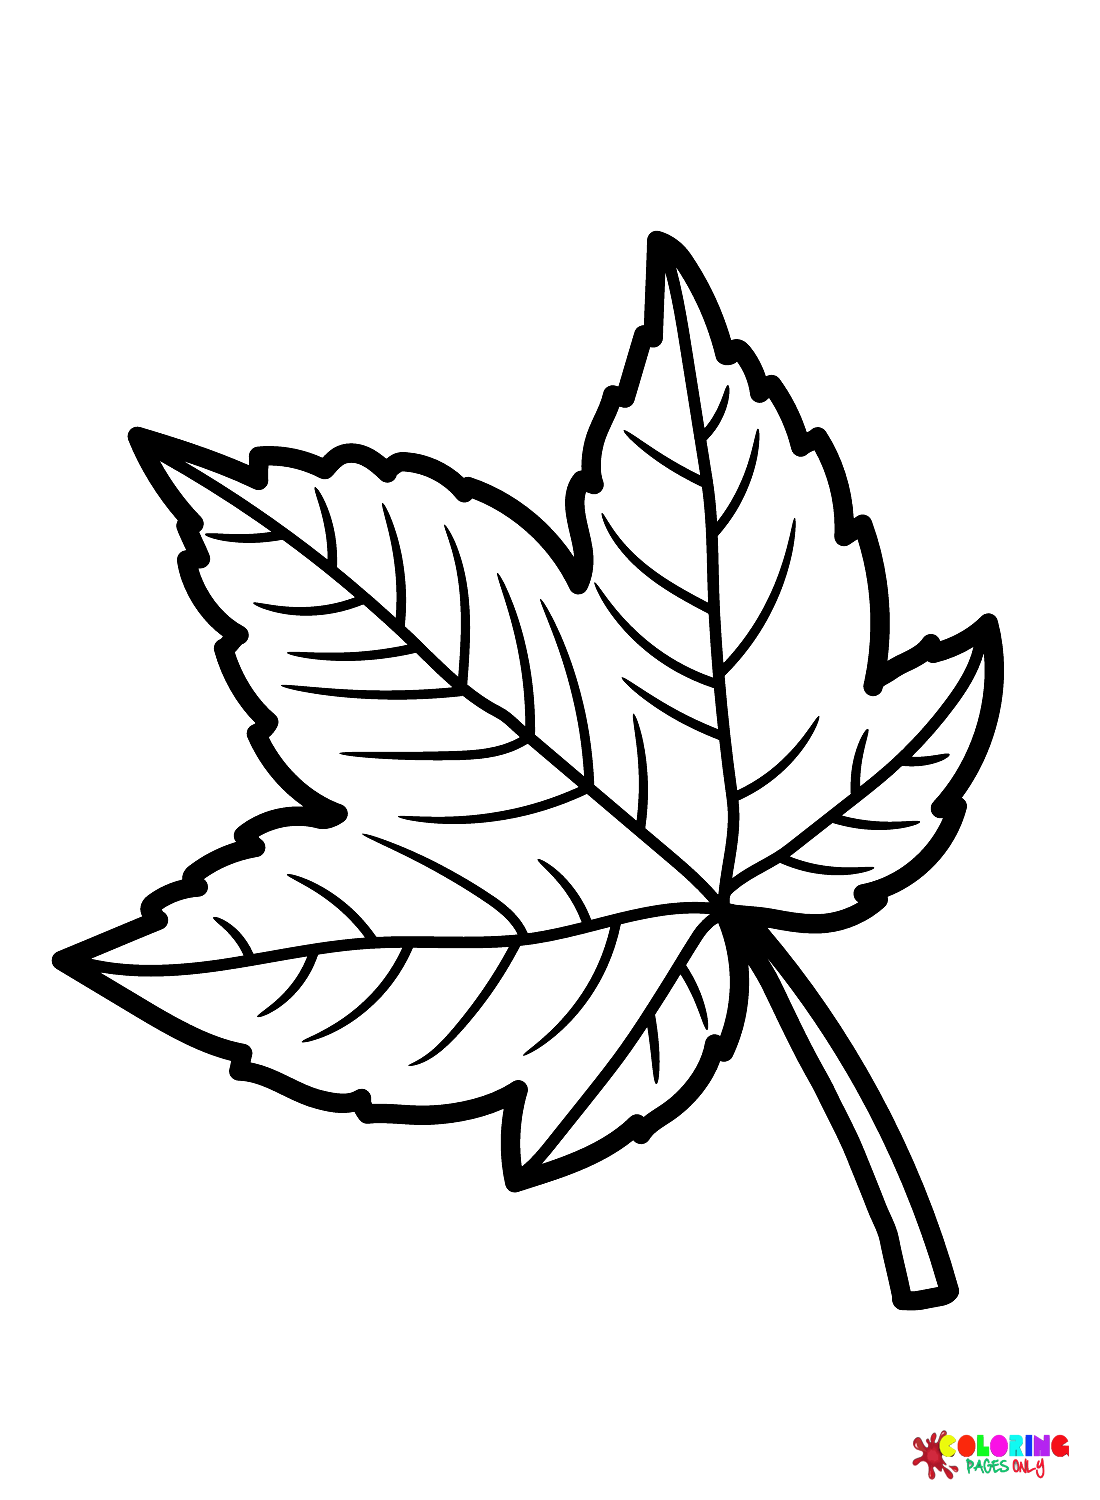 Sycamore Leaf from Leaves